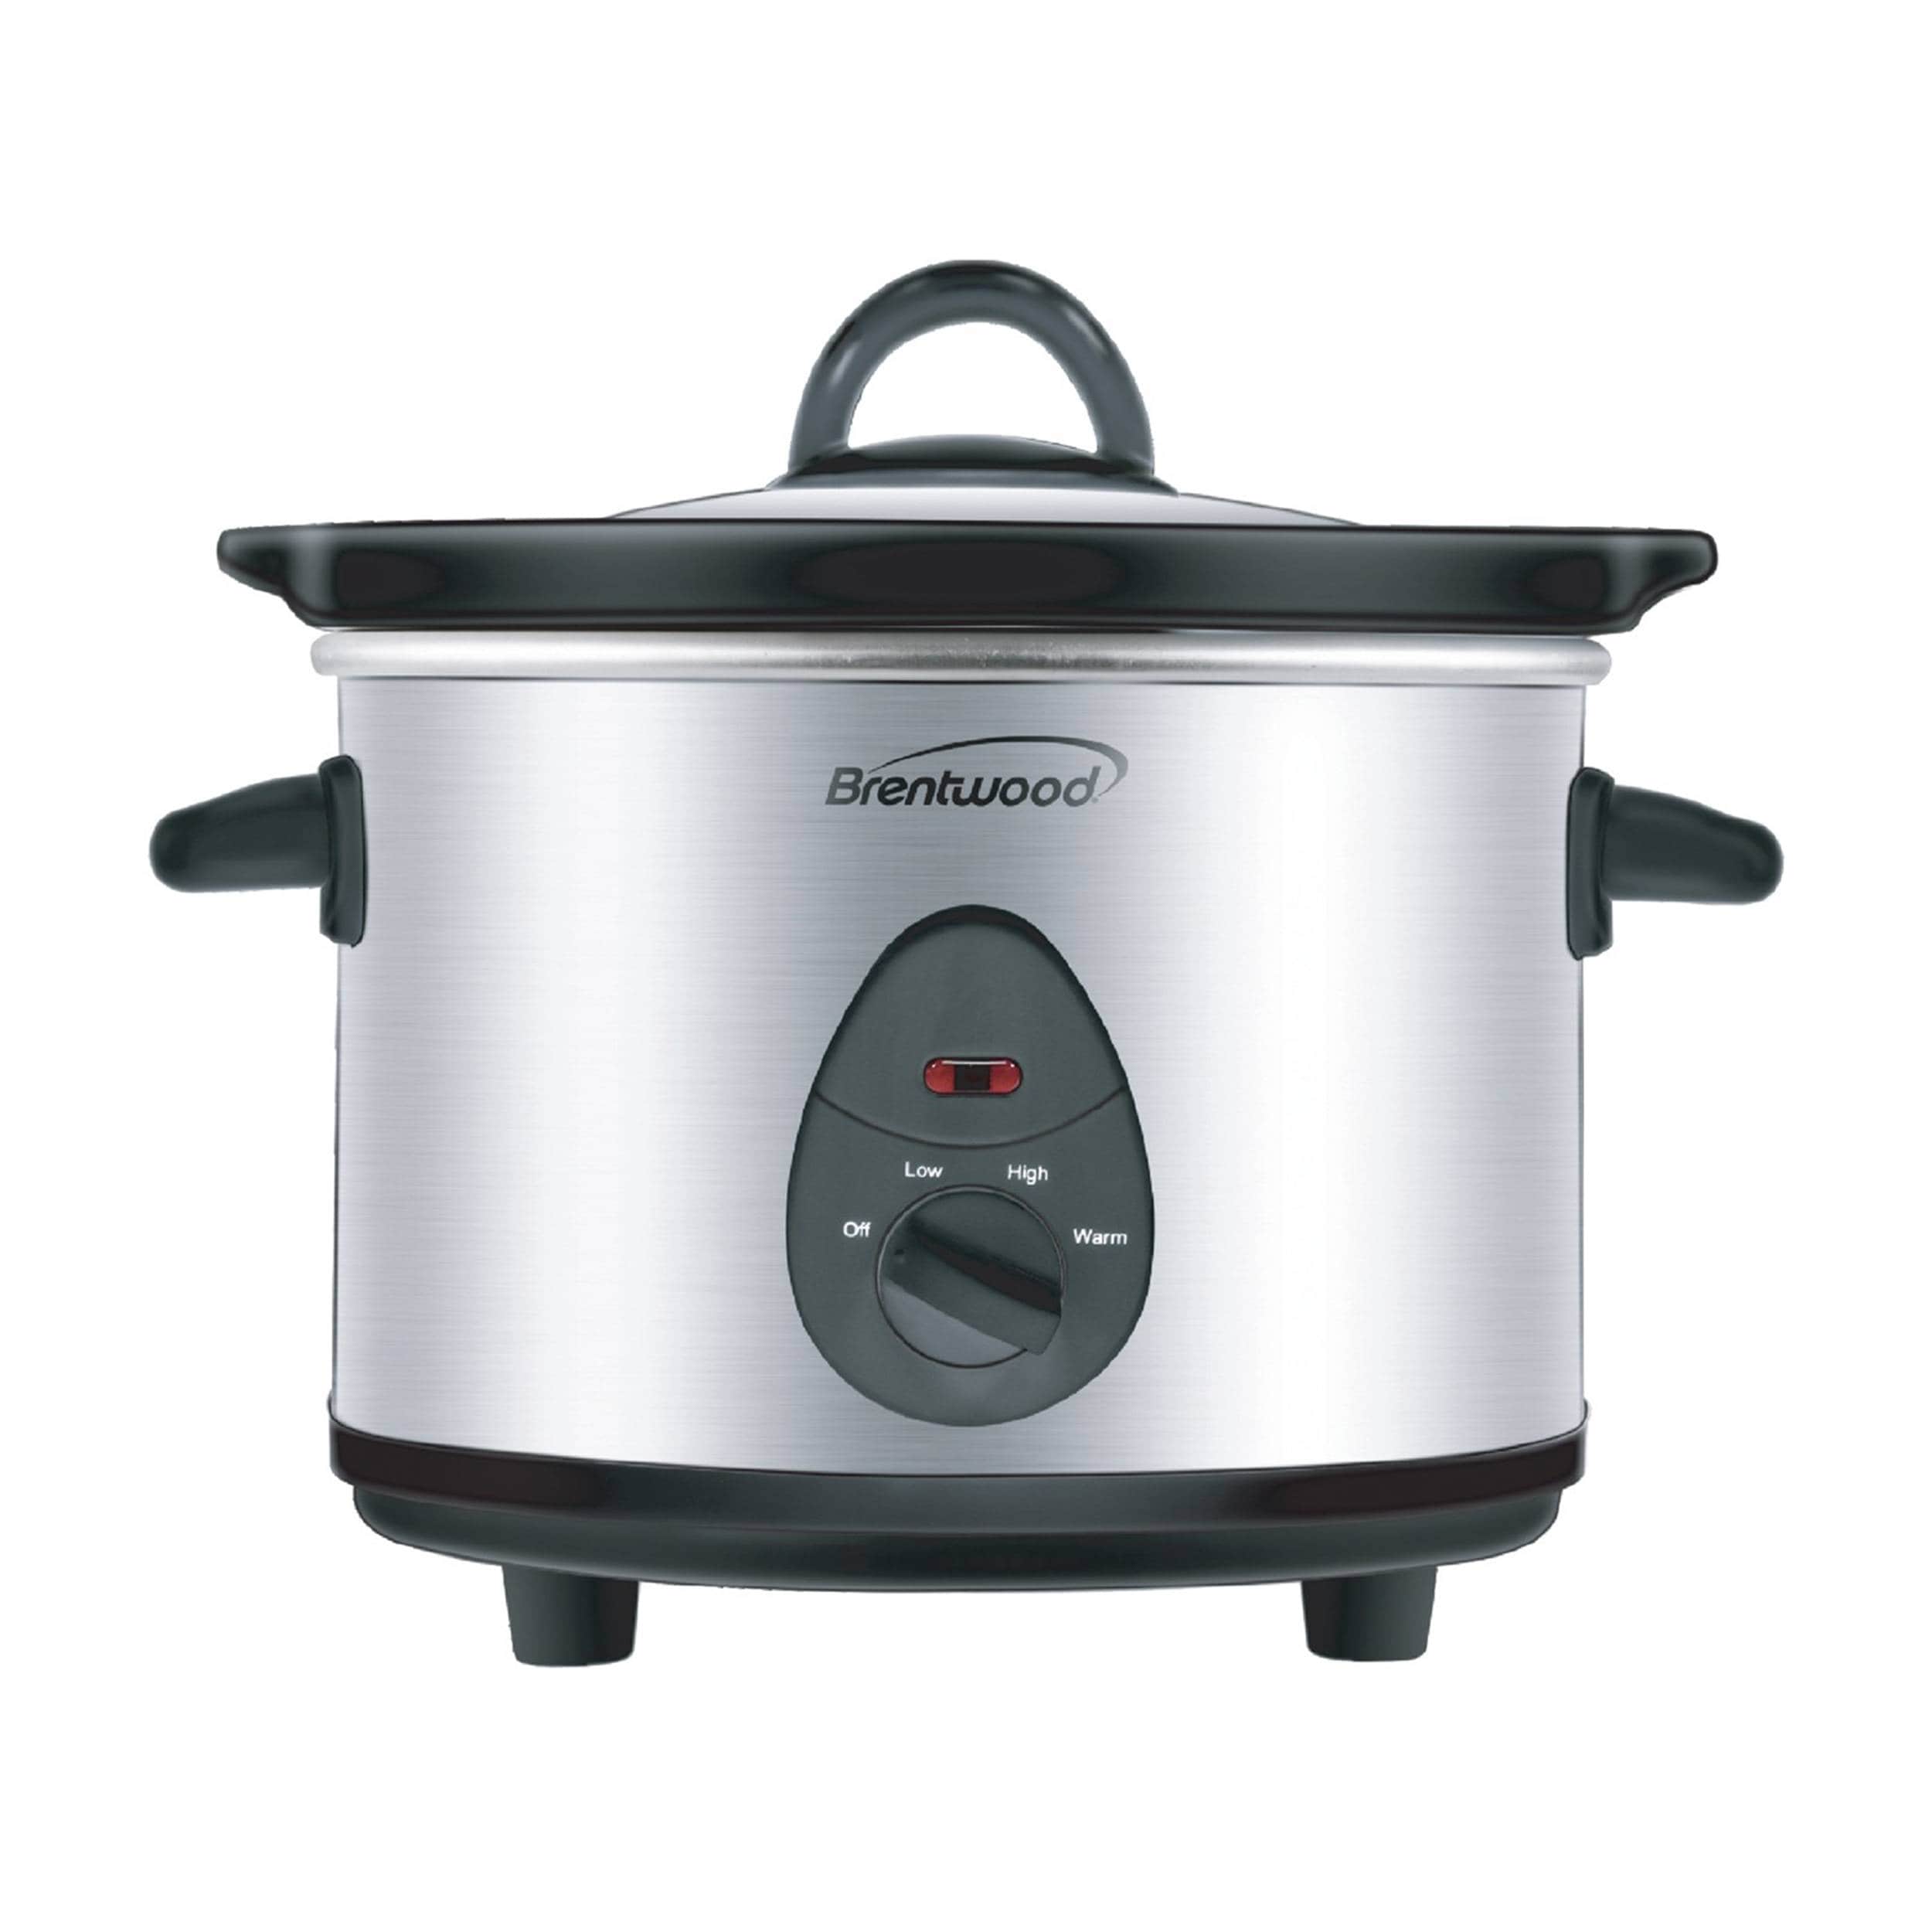 Courant 5 qt. (2.5 qt.) Each Double Slow Cooker - Stainless Steel